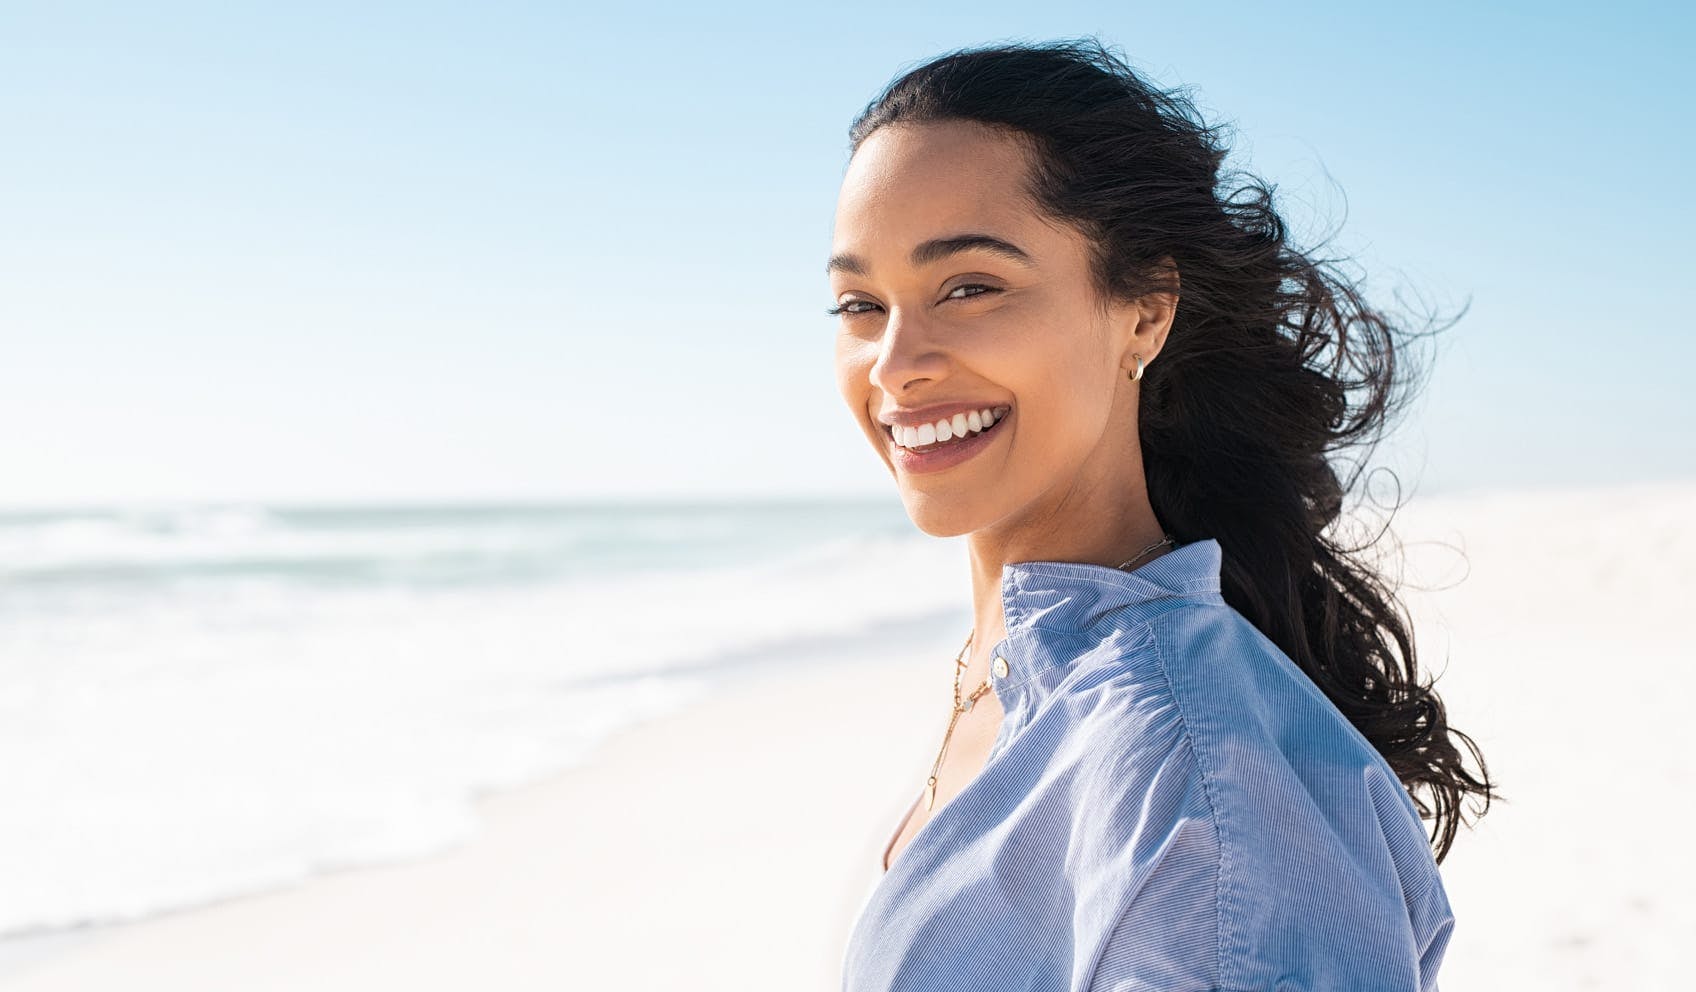 Woman smiling and standing on the beach